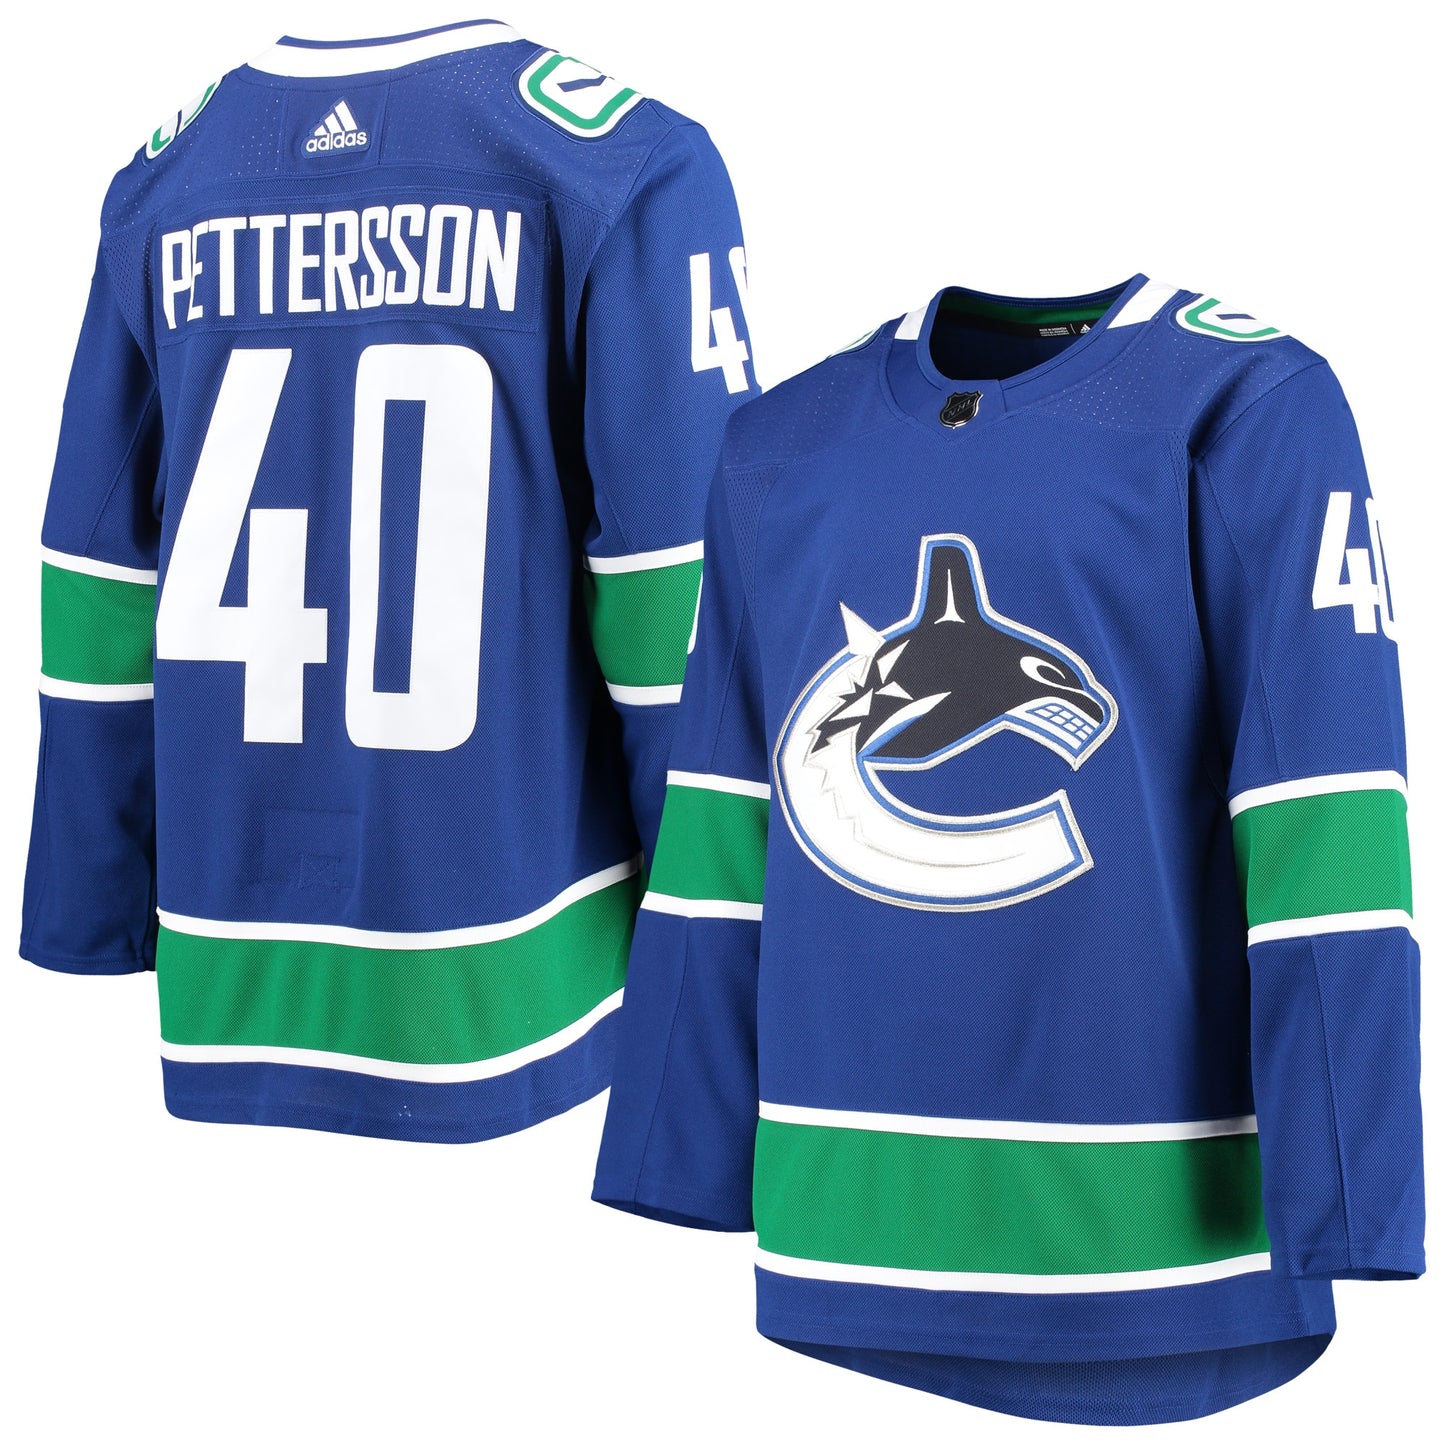 Elias Pettersson Vancouver Canucks adidas 2020/21 Authentic Home Player Jersey - Blue